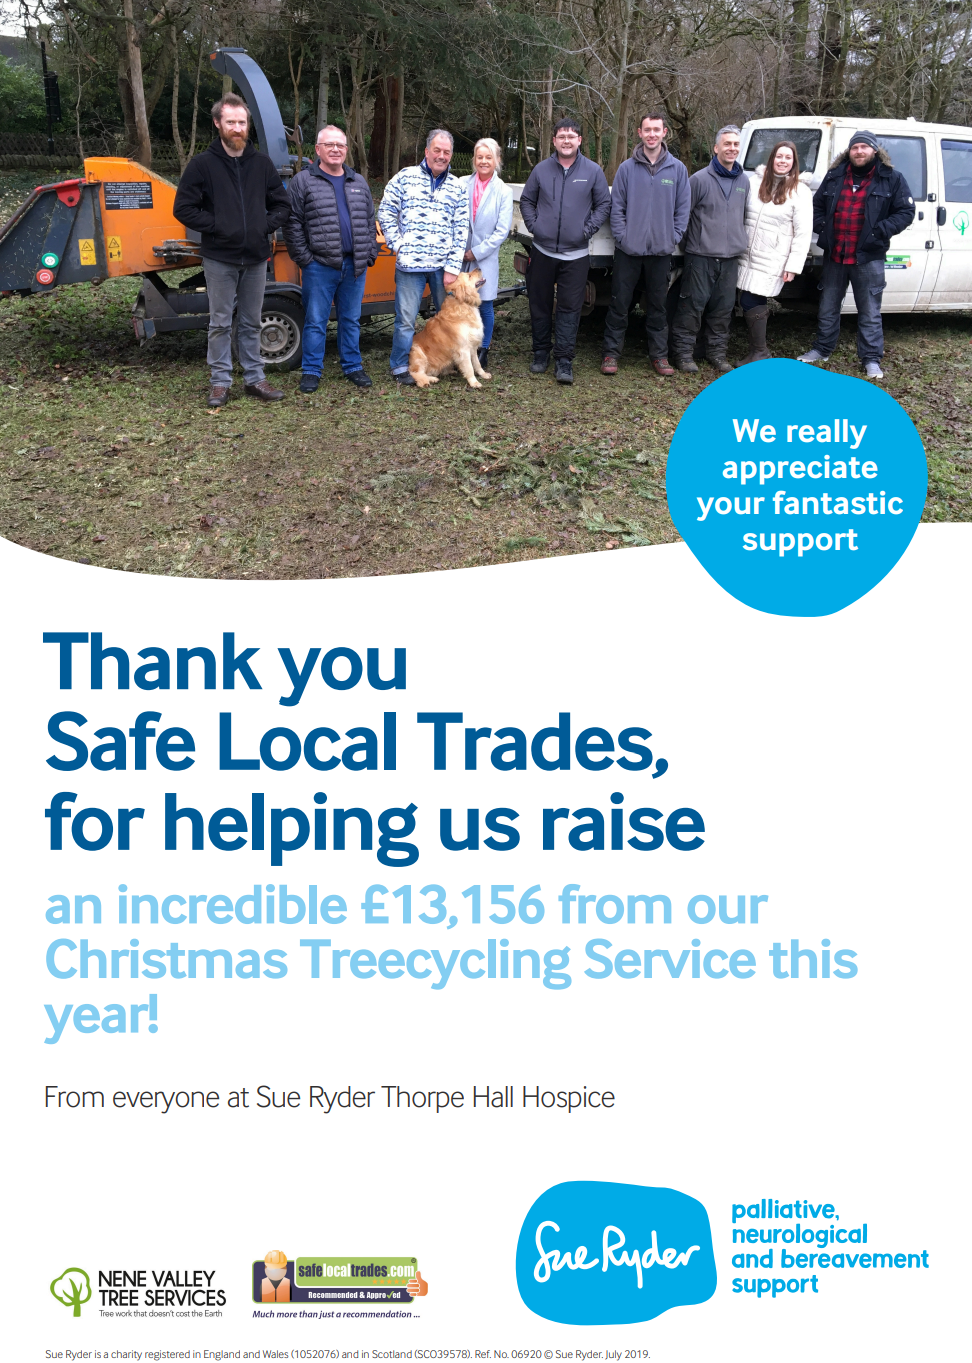 Sue Ryder Christmas Tree Recycling